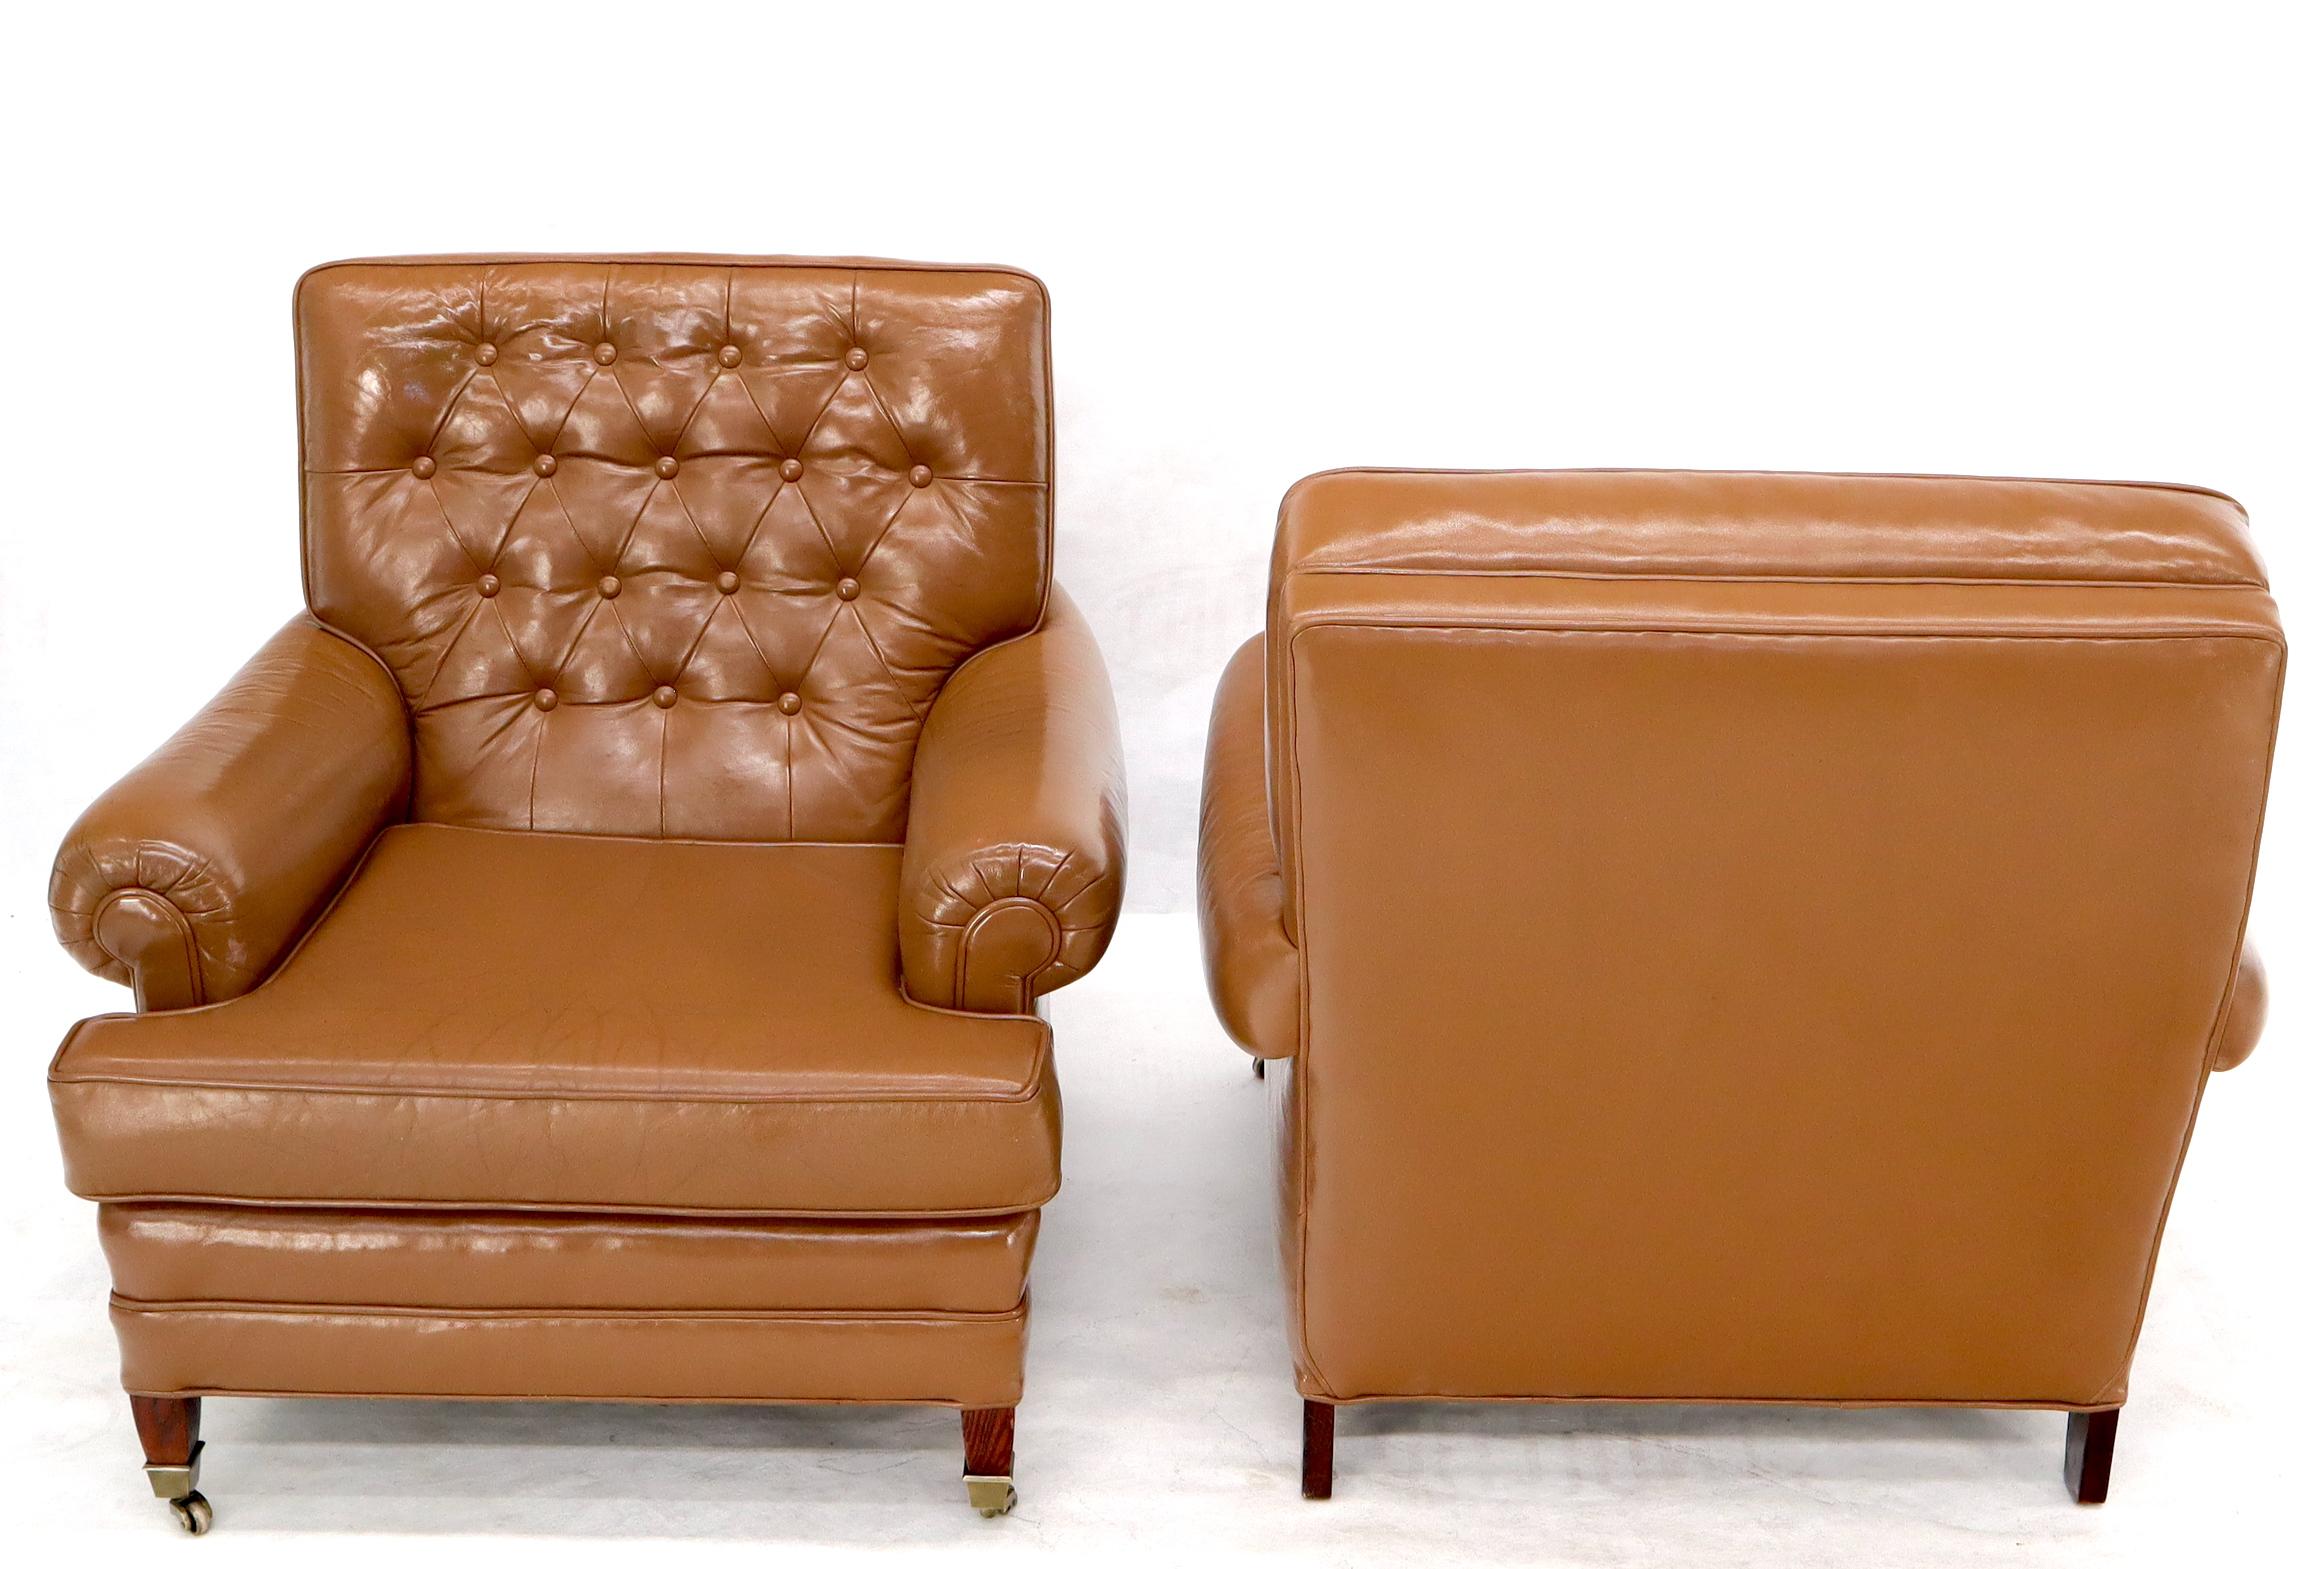 Pair of Chesterfield Style Leather Chairs W/ Ottomans Brown to Tan For Sale 2